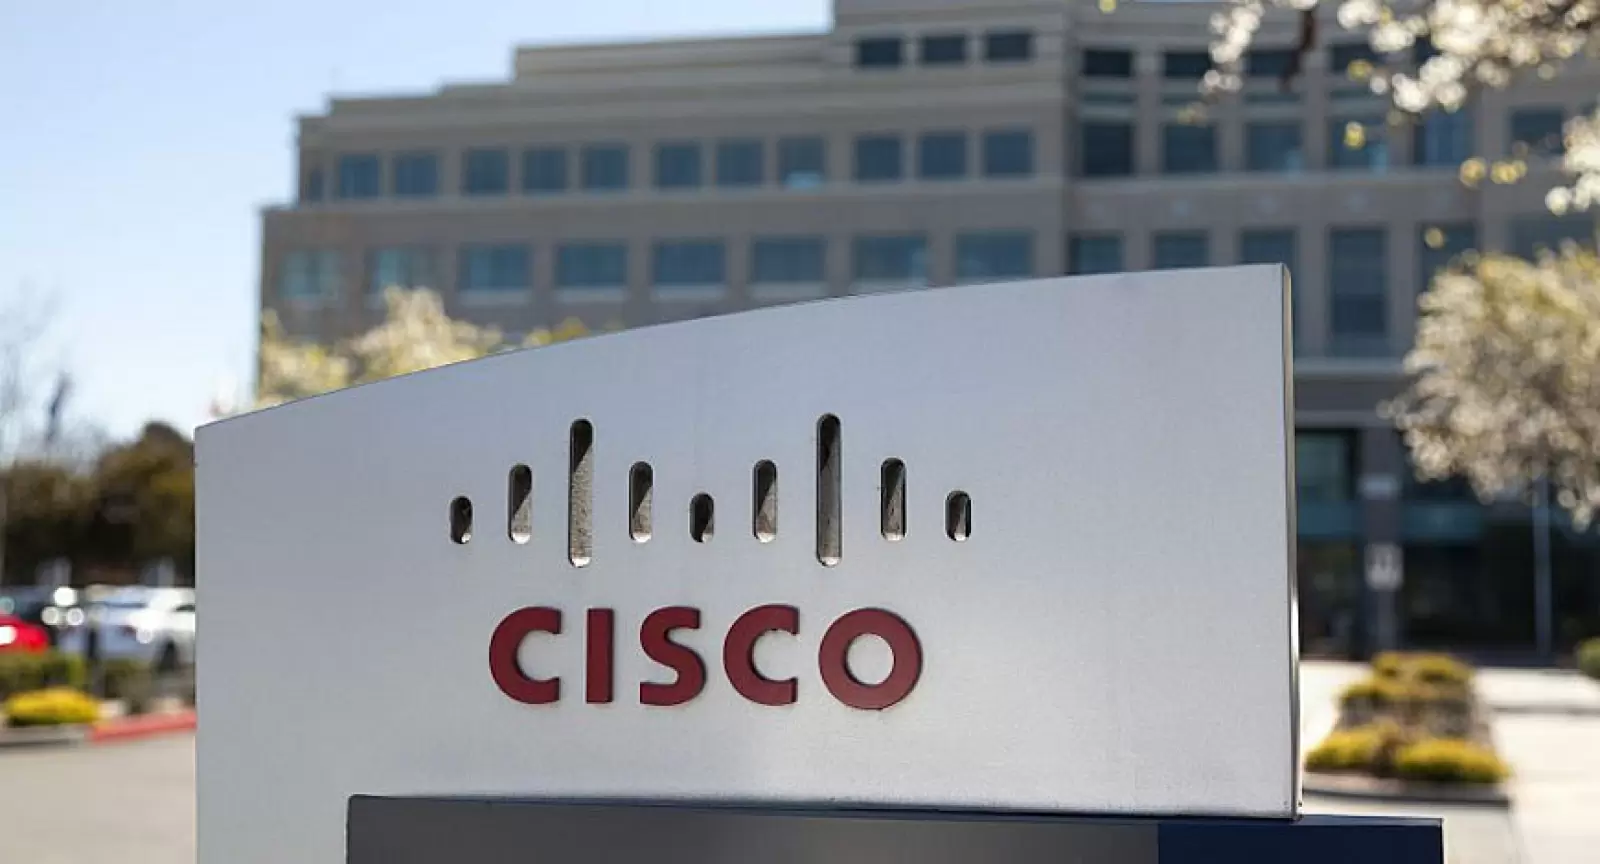 Giant networking company Cisco is going to do layoffs, thousands of employees may be laid off